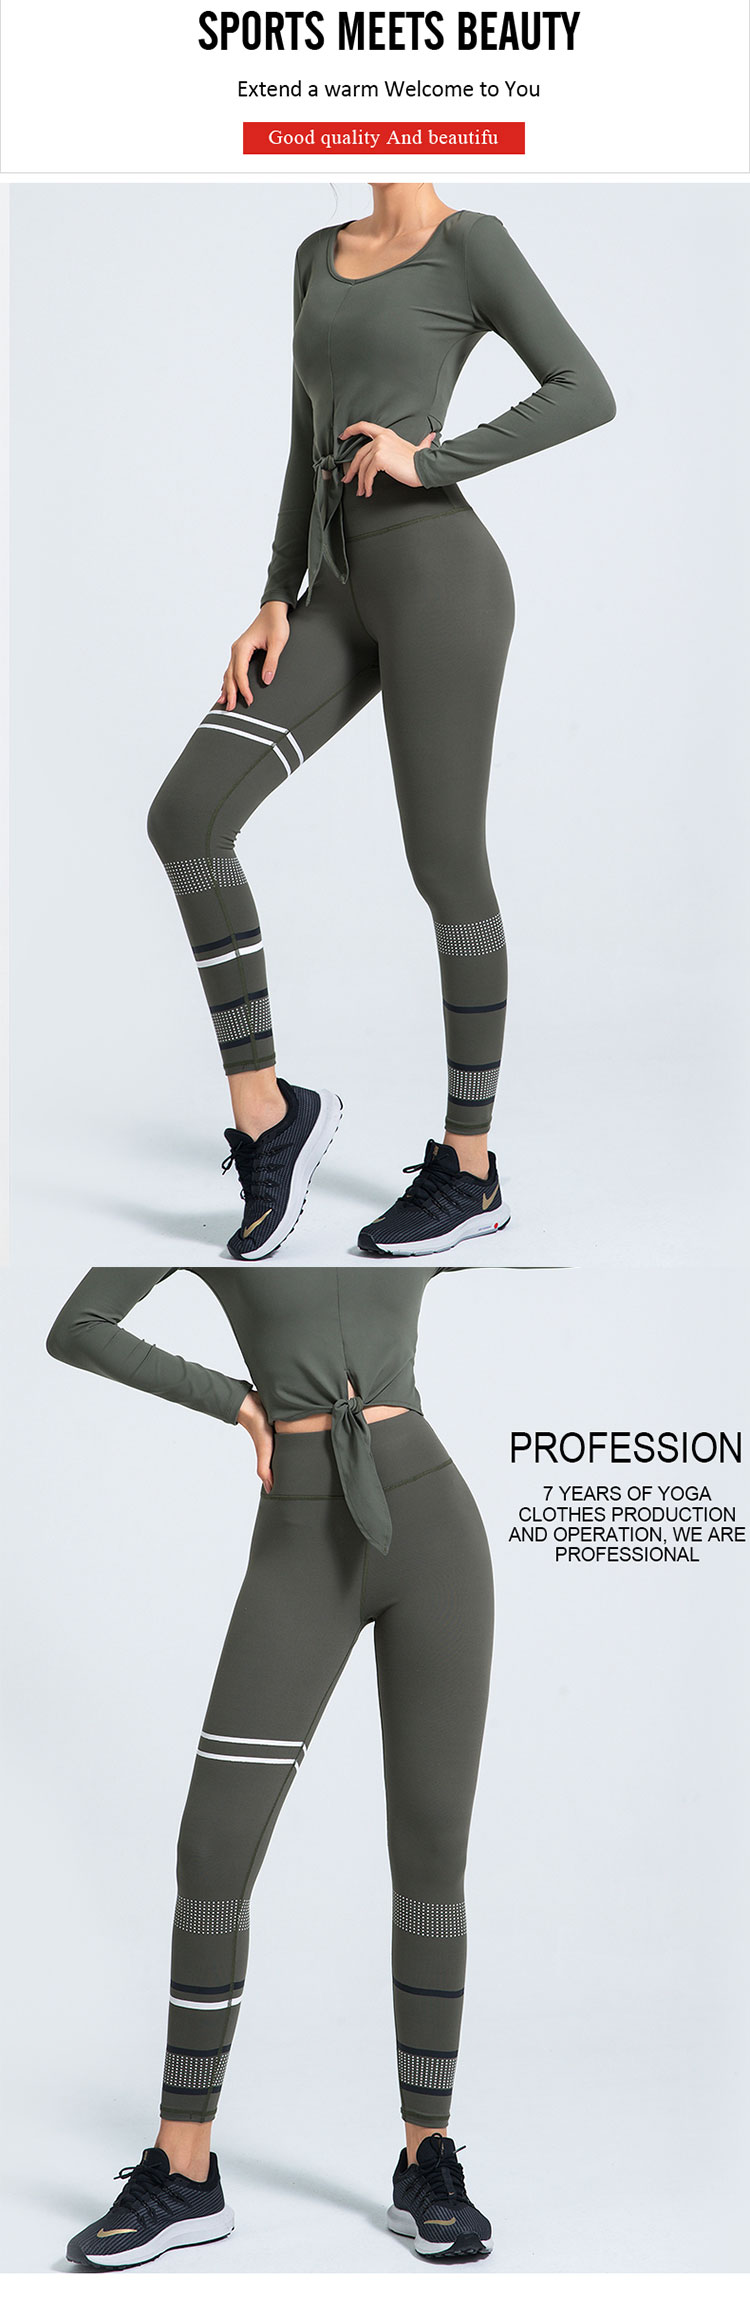 Cute-yoga-outfits-USES-the-perfect-combination-of-dart-and-ergonomic